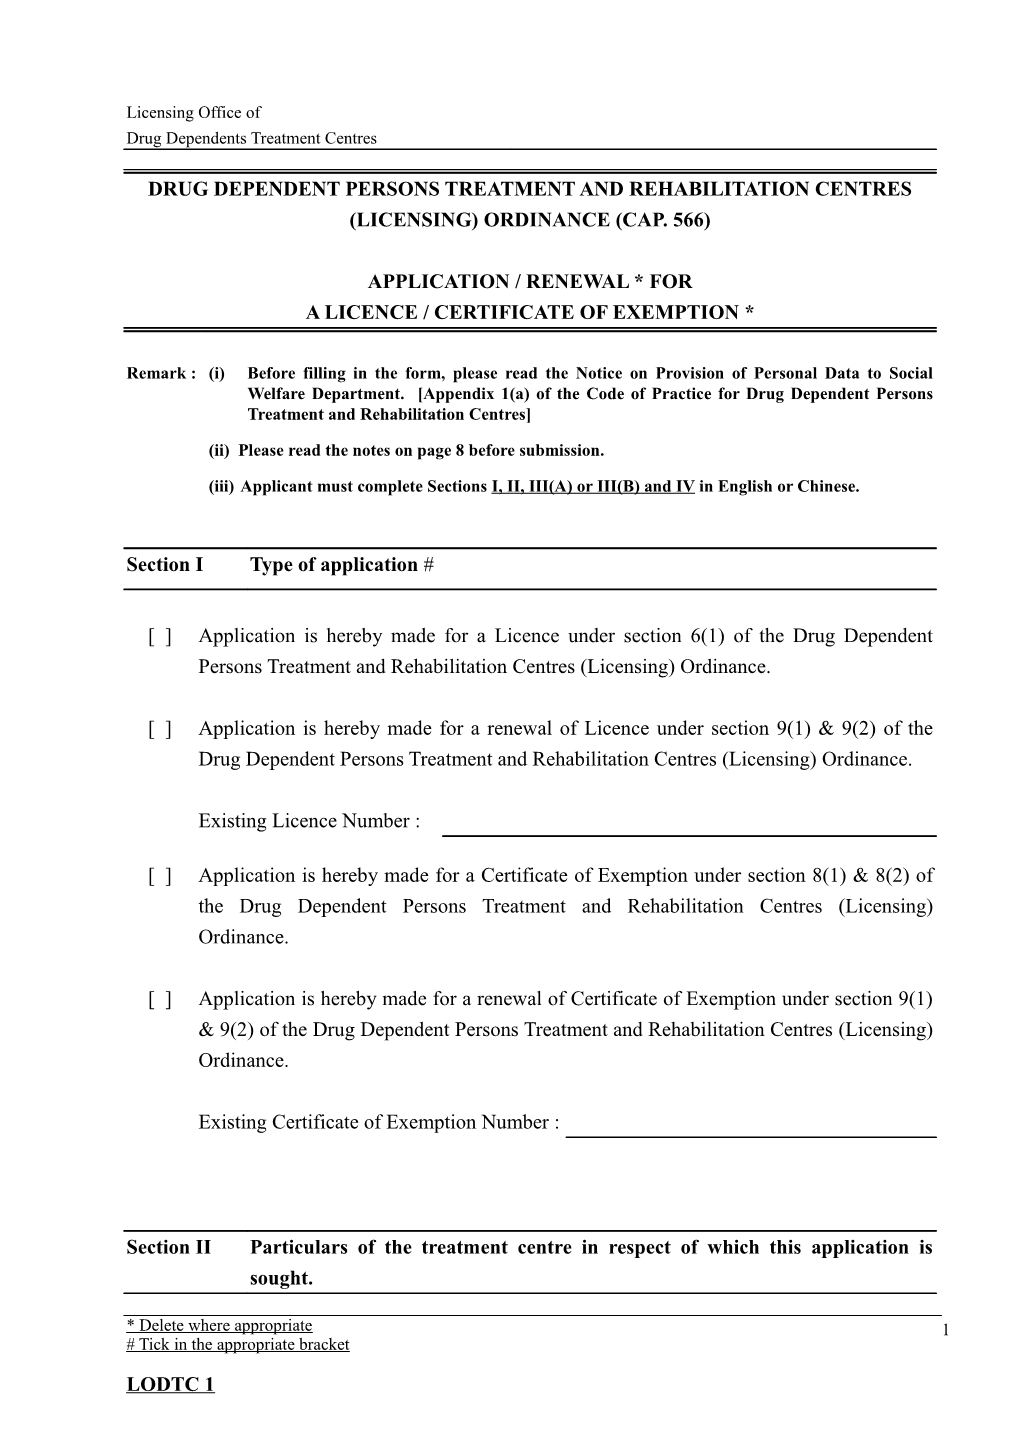 Drug Dependent Persons Treatment and Rehabilitation Centres (Licensing) Ordinance (Cap